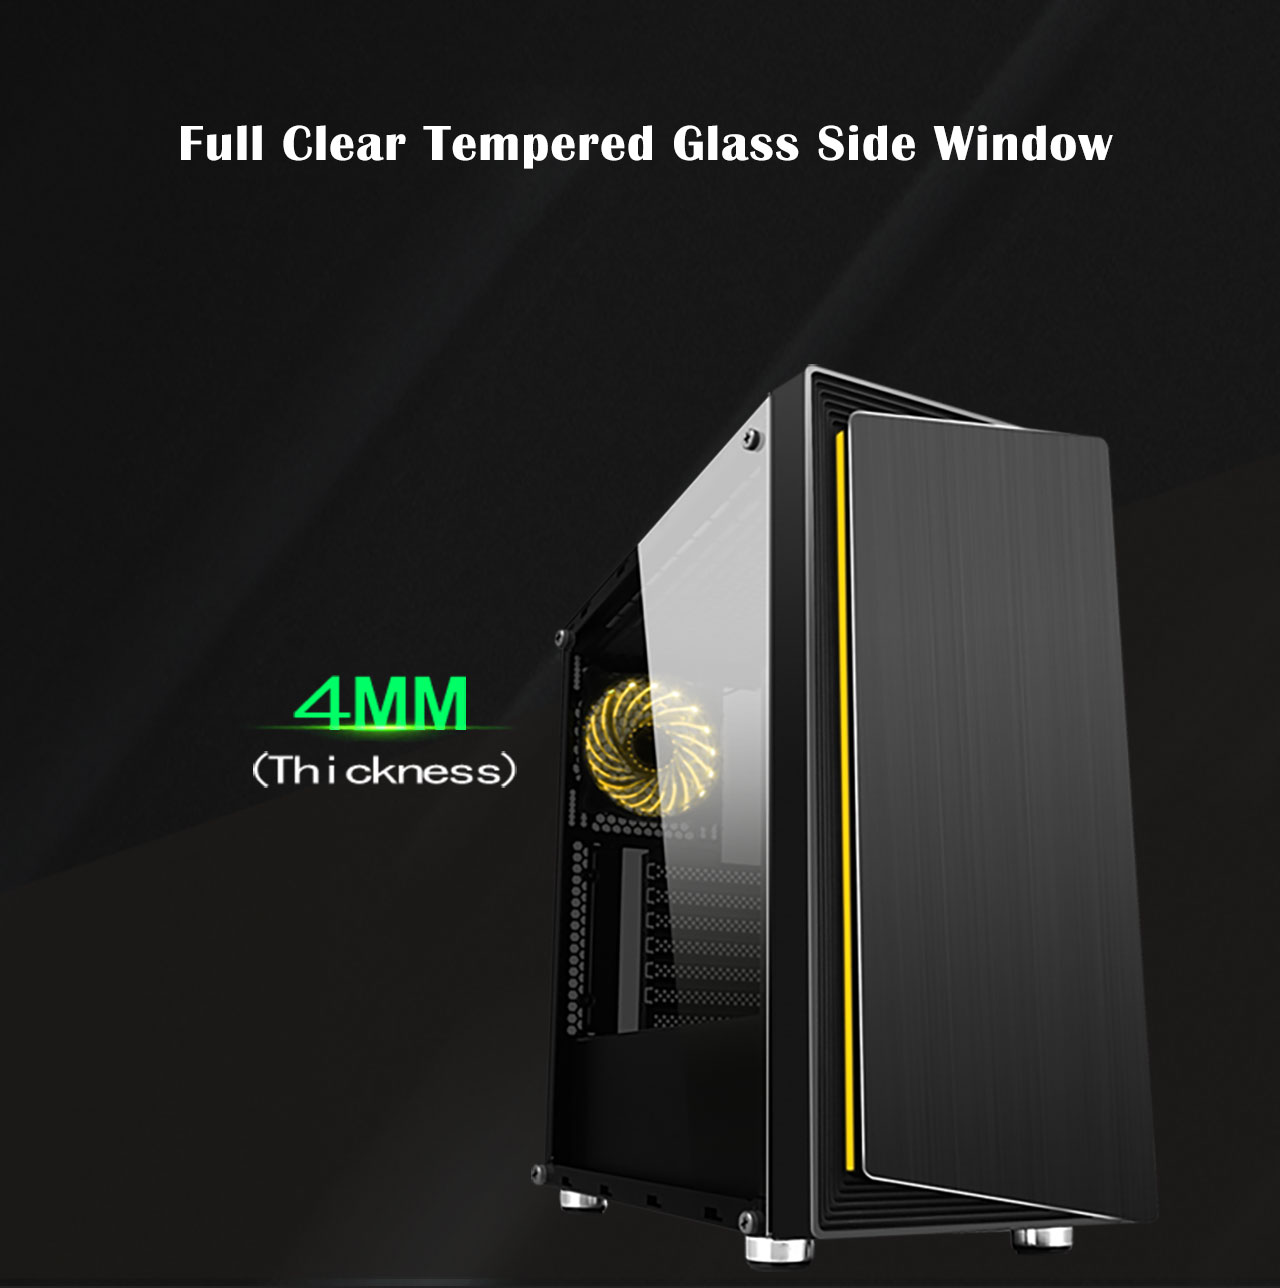 The DIYPC DIY-Line-RGB Case facing to the right with yellow lighting and text that reads: 4MM (Thickness). The text above it all reads: Full Clear Tempered Glass Side Window